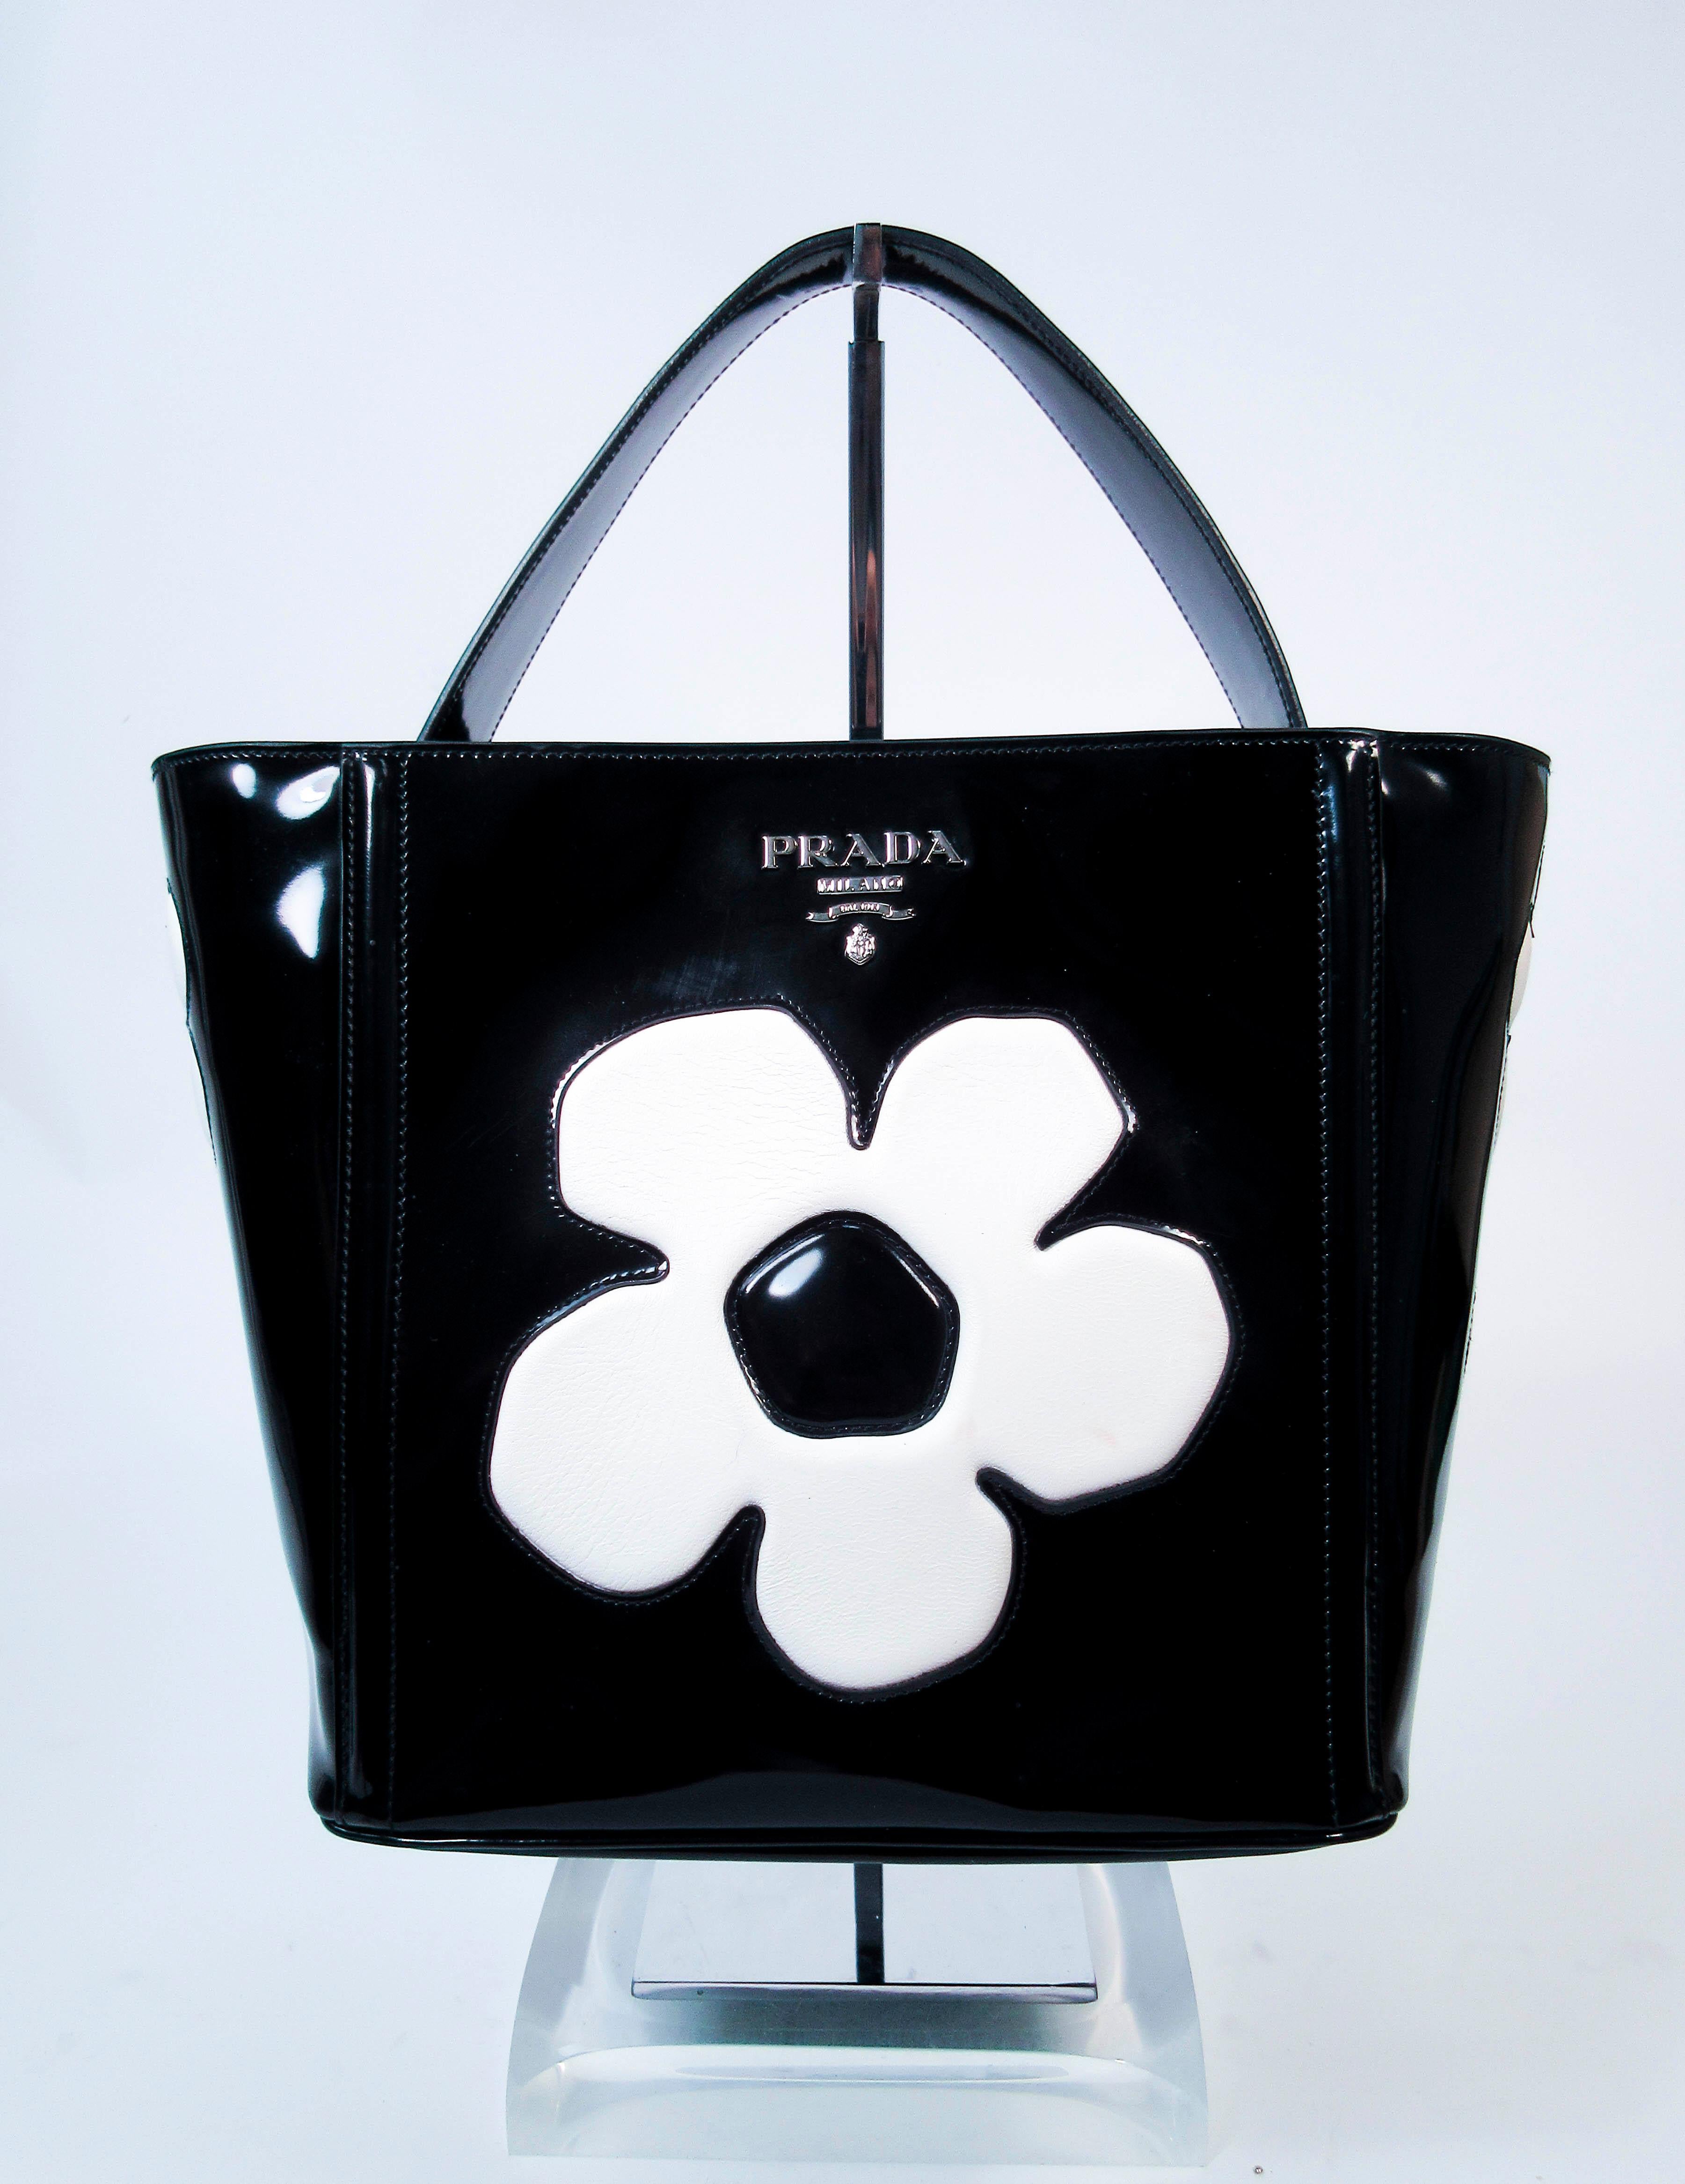 This vintage Prada purse is composed of black & white patent leather. Made in Italy. Features multiple interior compartments & an optional strap. Comes with dustbag. In excellent 